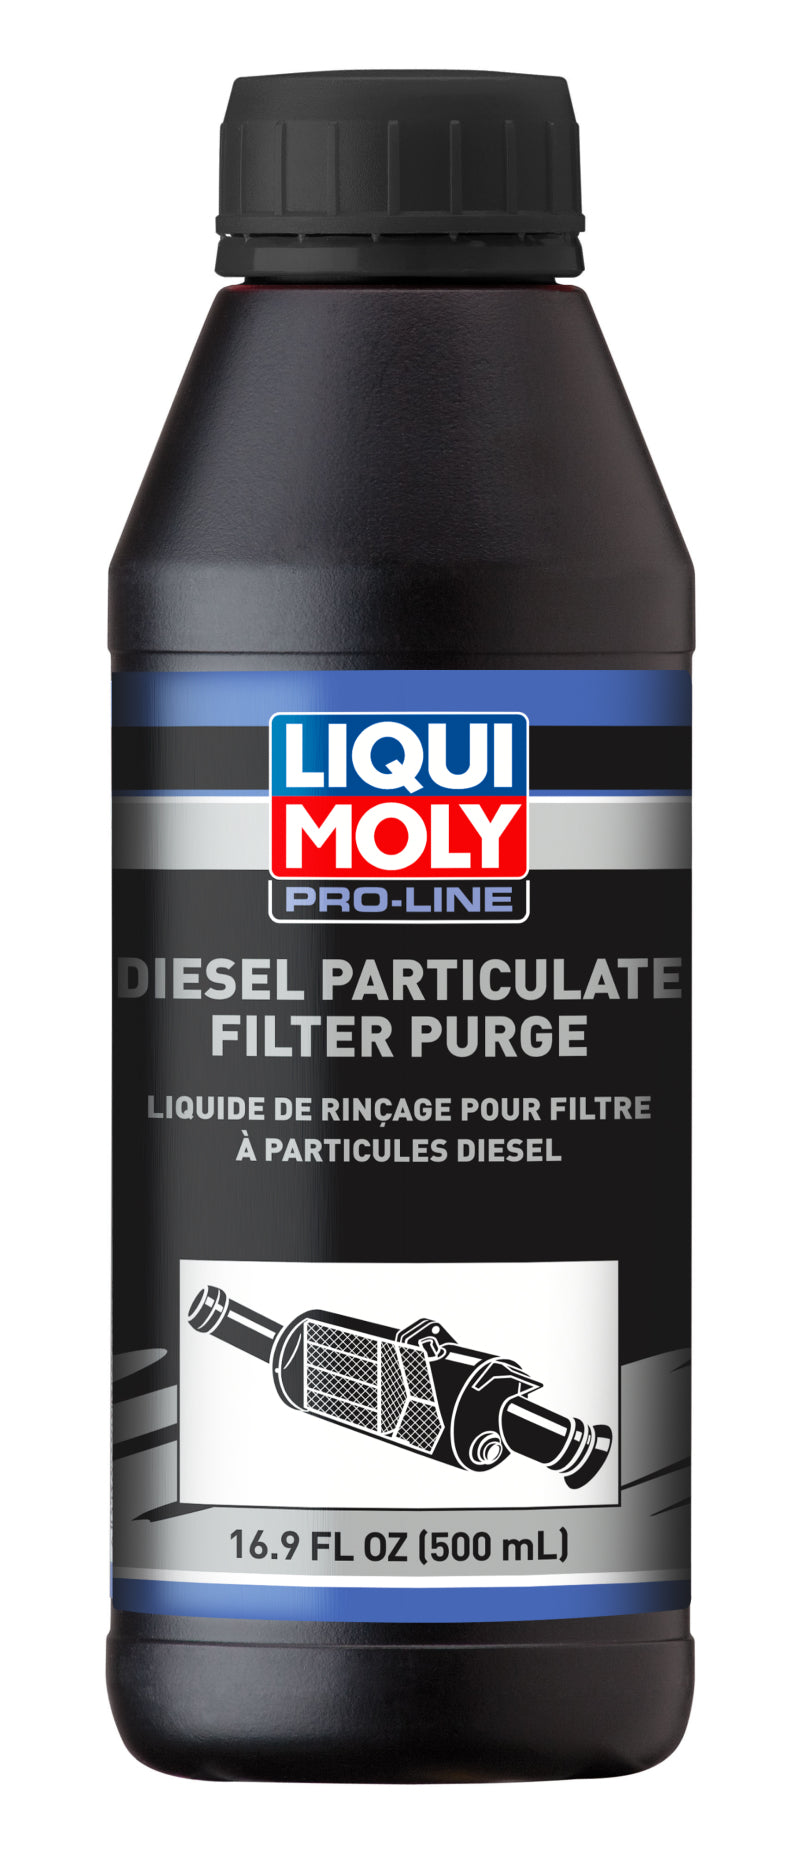 LIQUI MOLY 500mL Pro-Line Diesel Particulate Filter Purge.